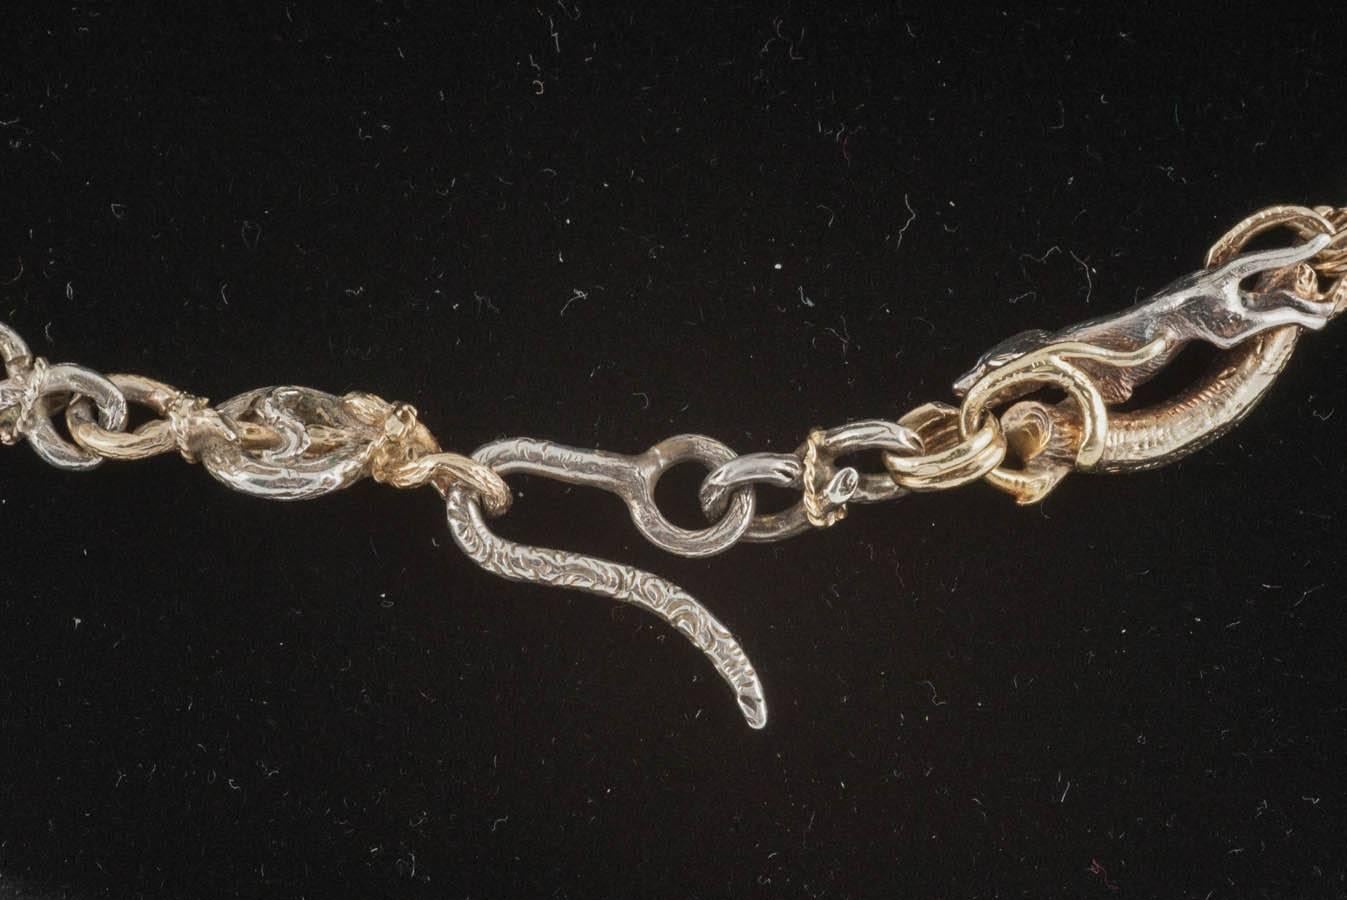 Women's Hunting necklace of Stags, Hounds and Foxes, in silver and gold, 19th century.